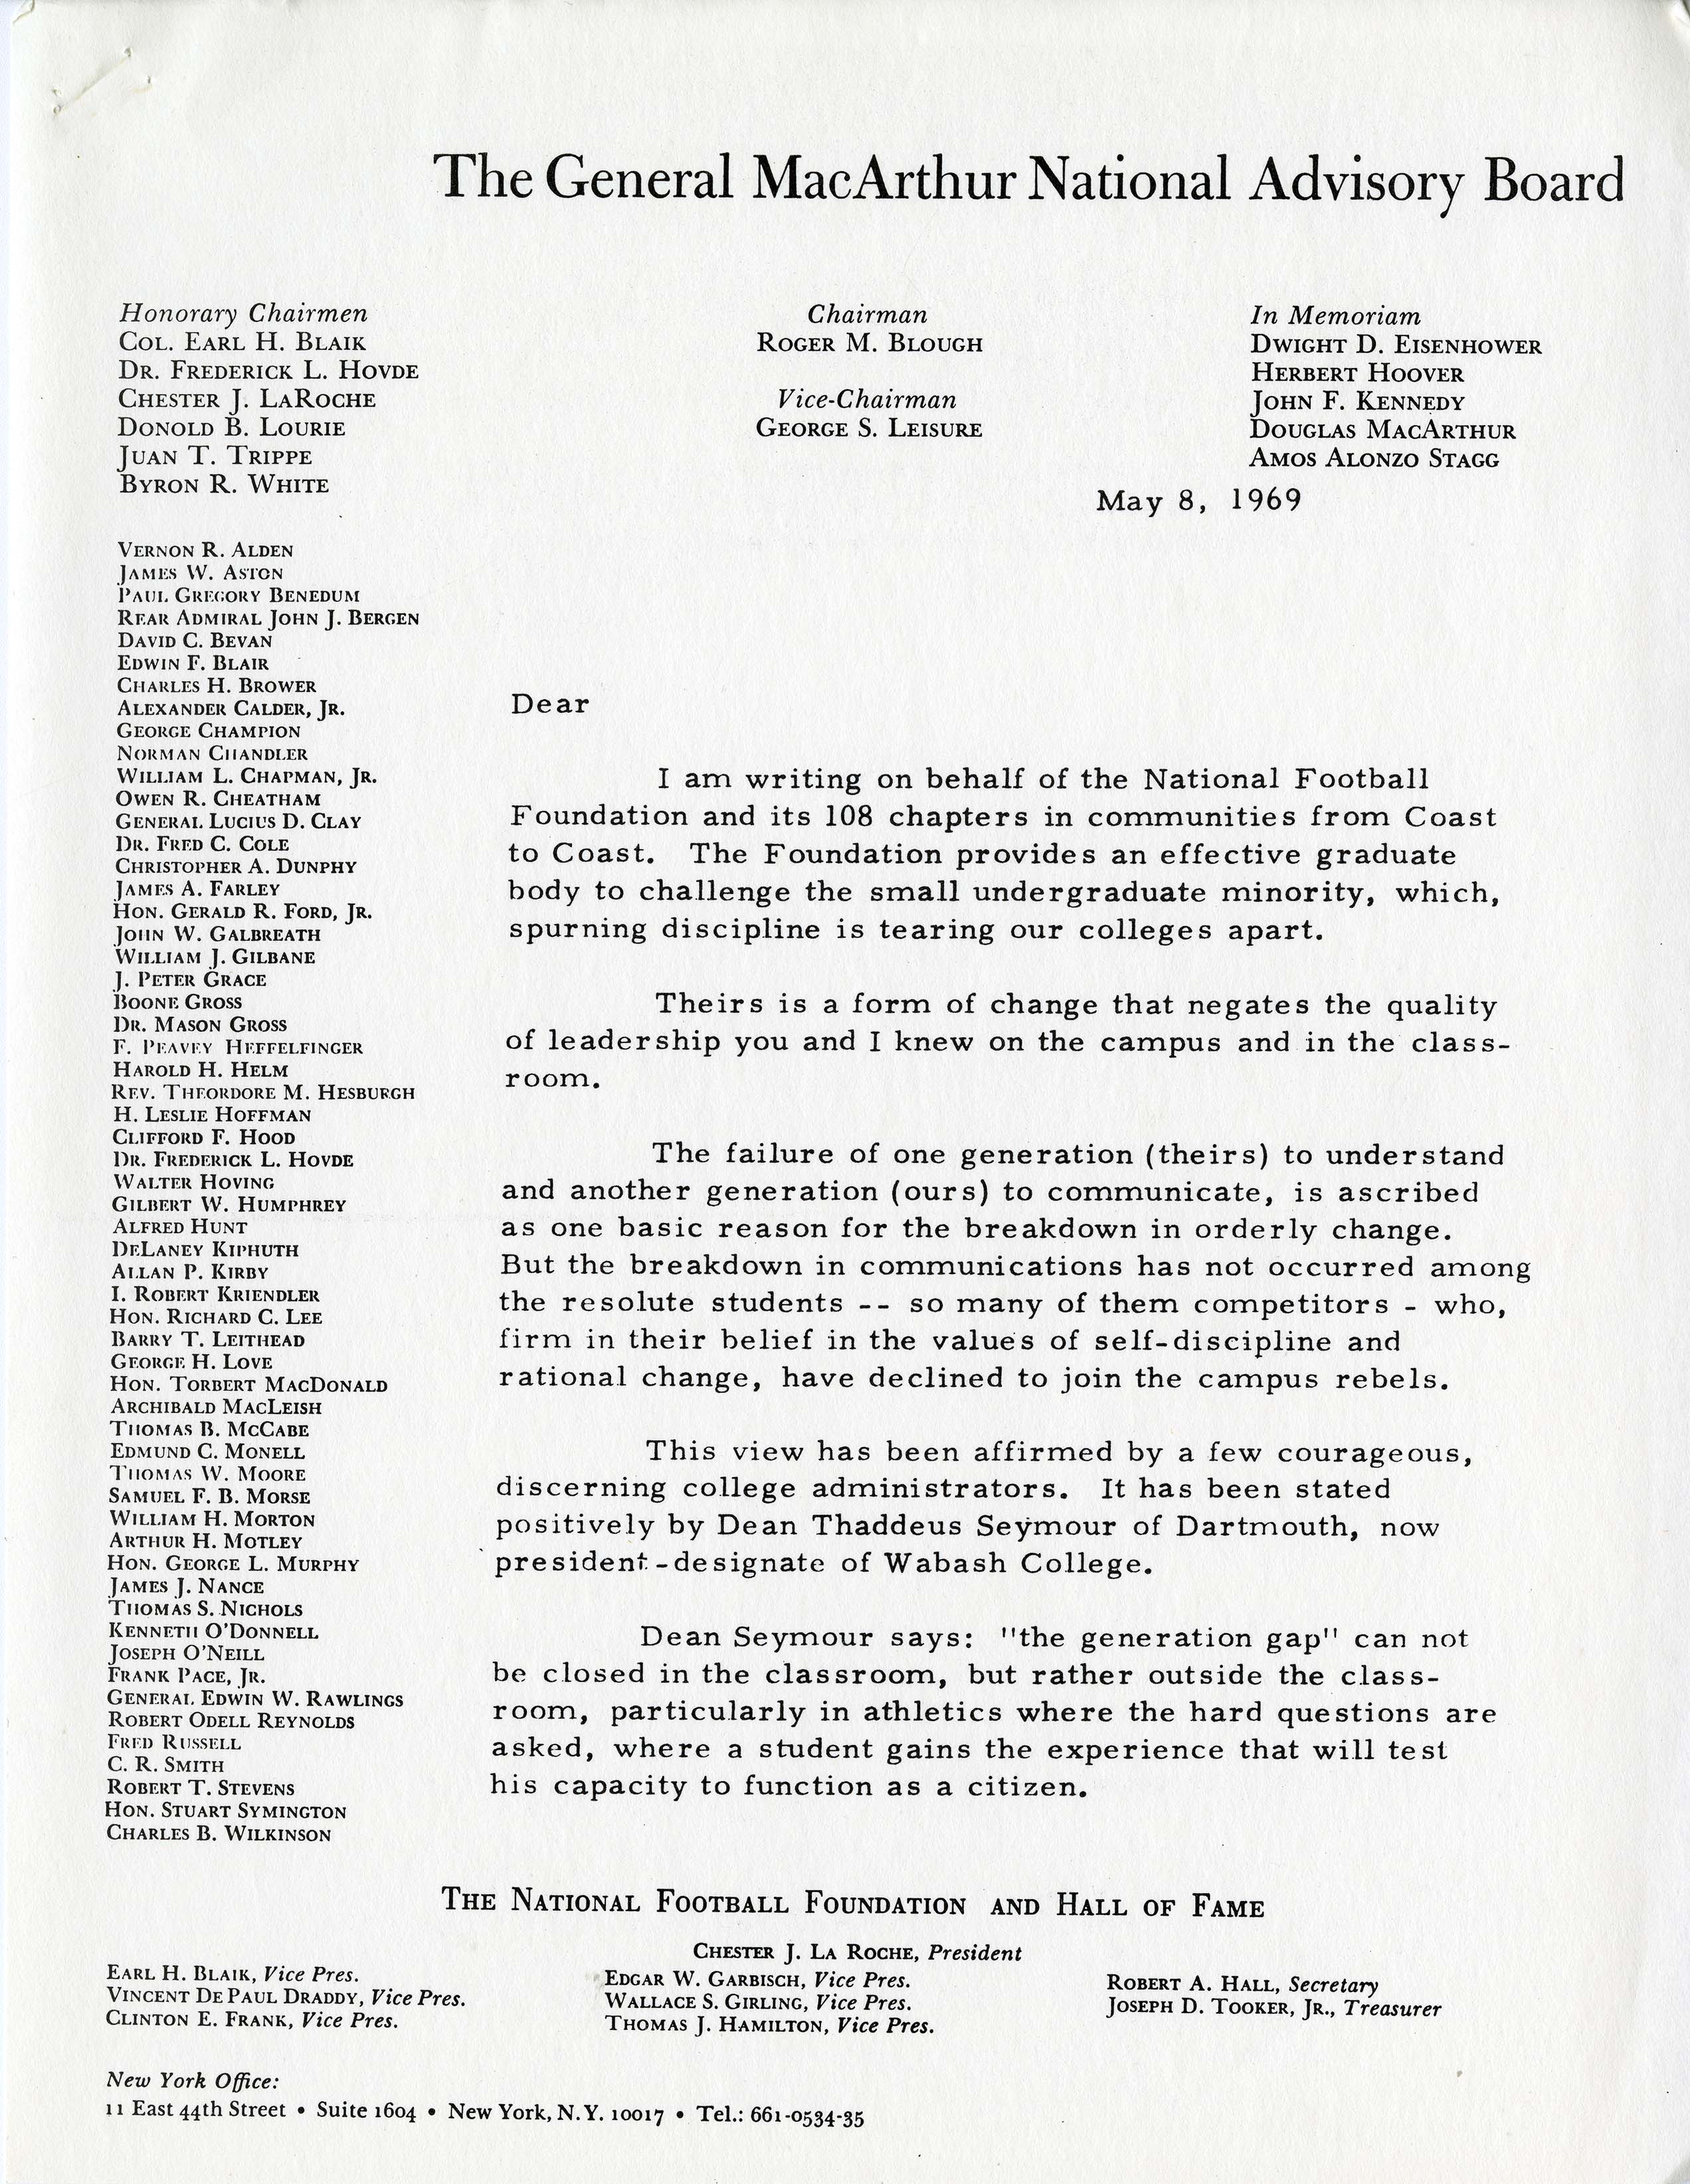 Letter from National Foundation and Hall of Fame to UConn Athletics Director John Toner, May 8, 1969